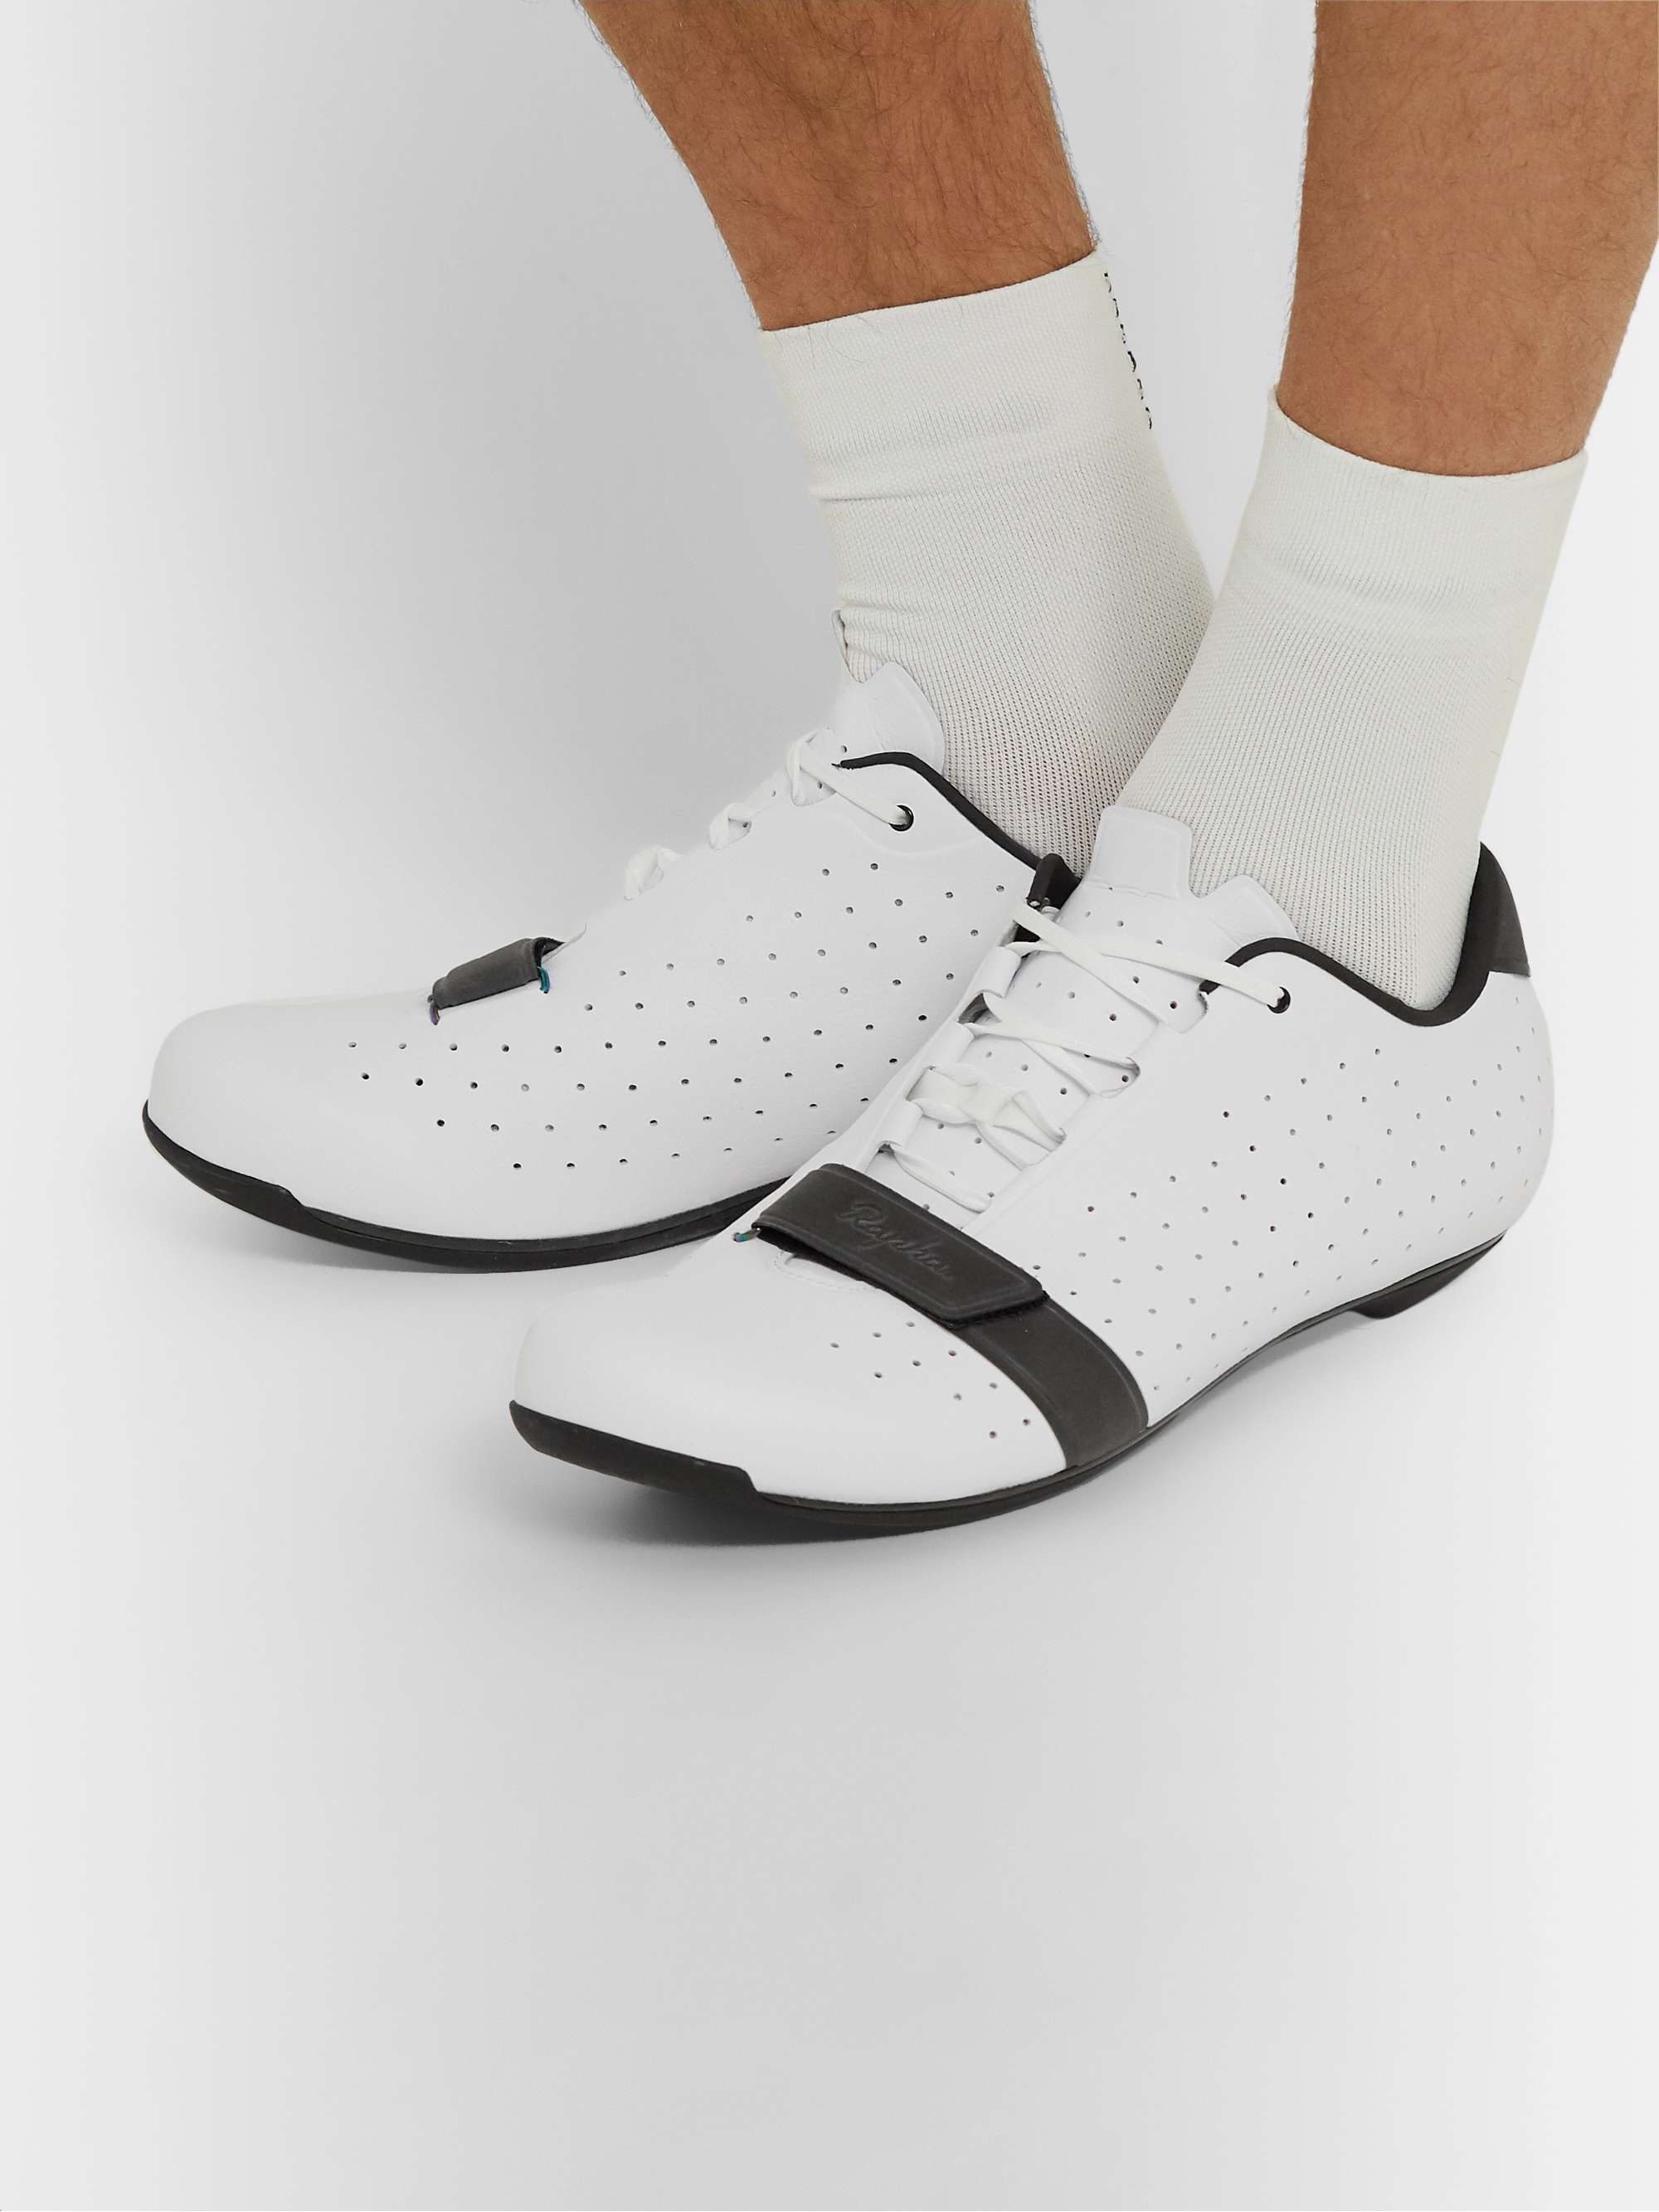 RAPHA Classic Cycling Shoes